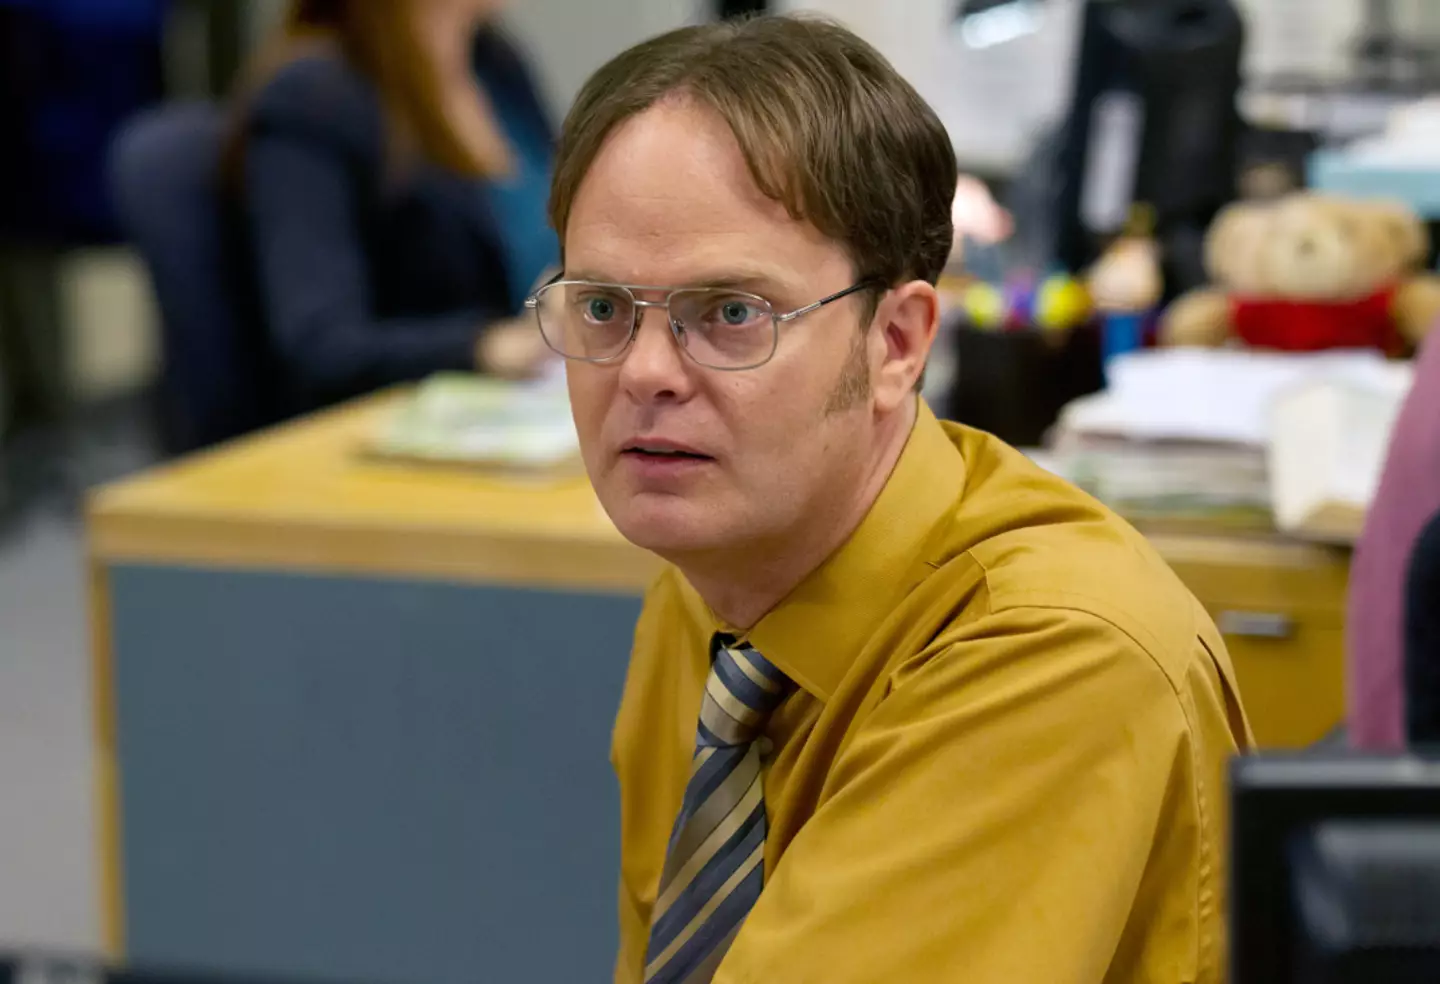 Rainn Wilson starred in the US iteration of The Office.